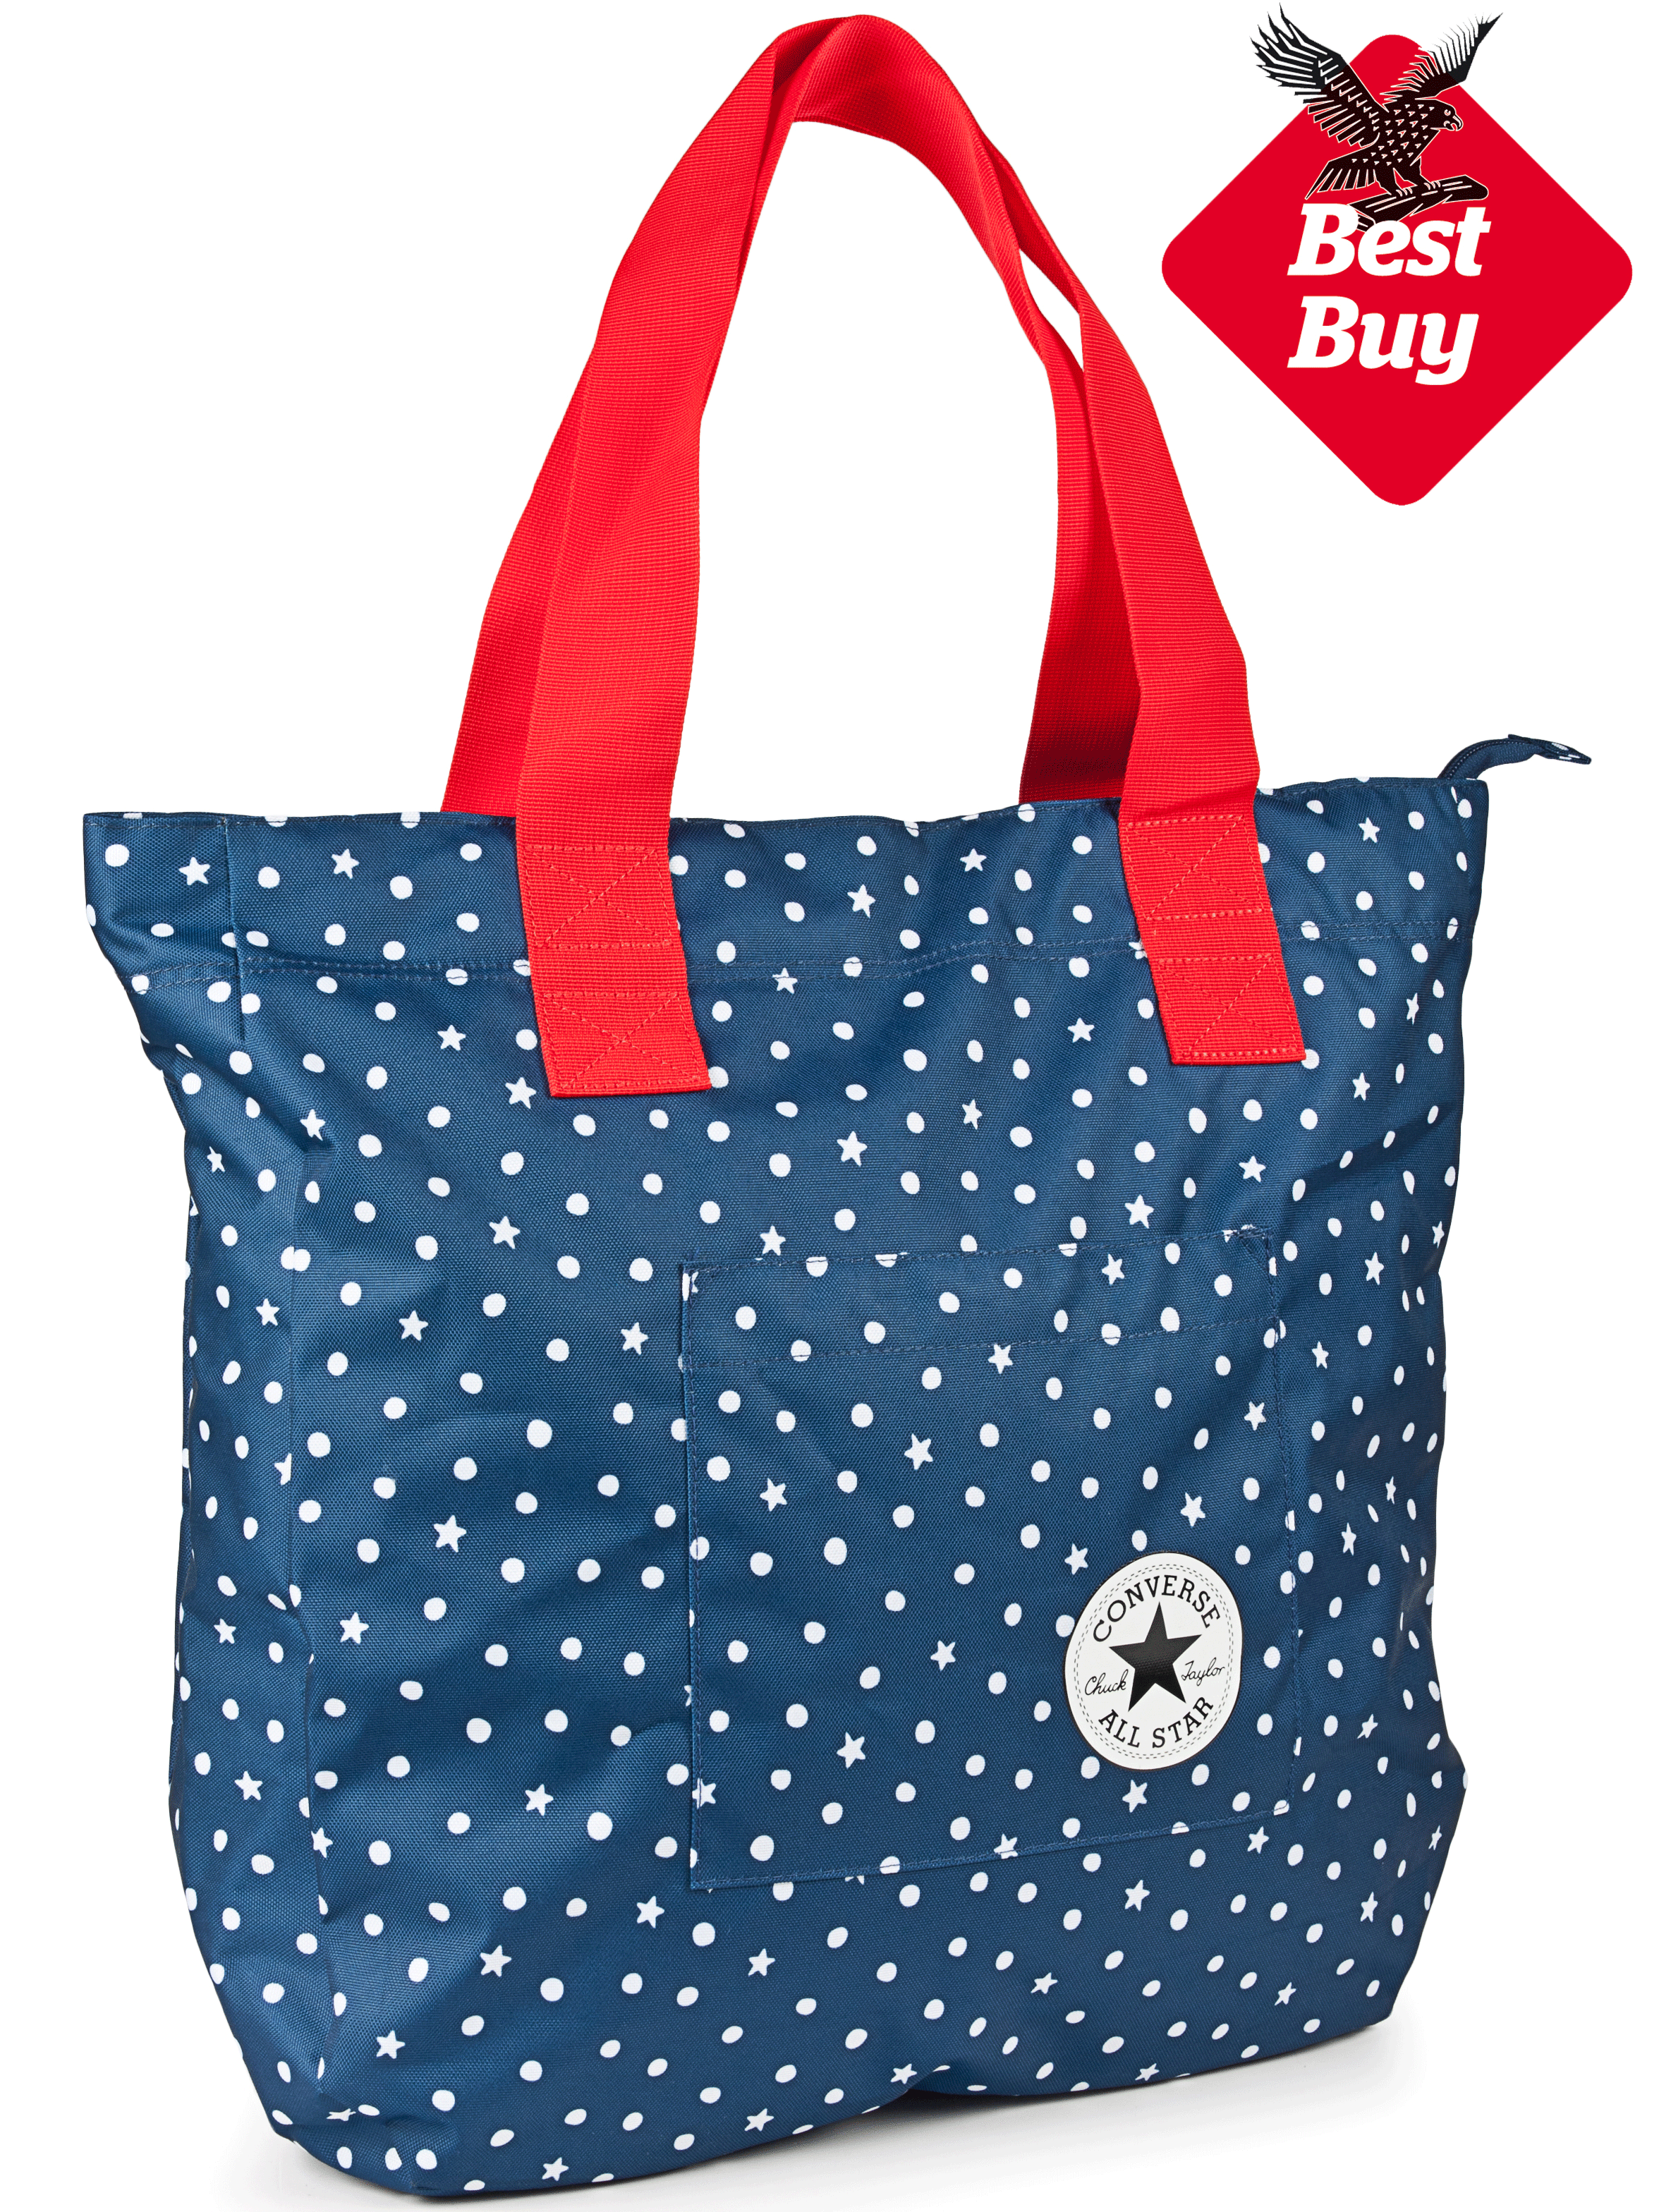 12 best beach bags | The Independent